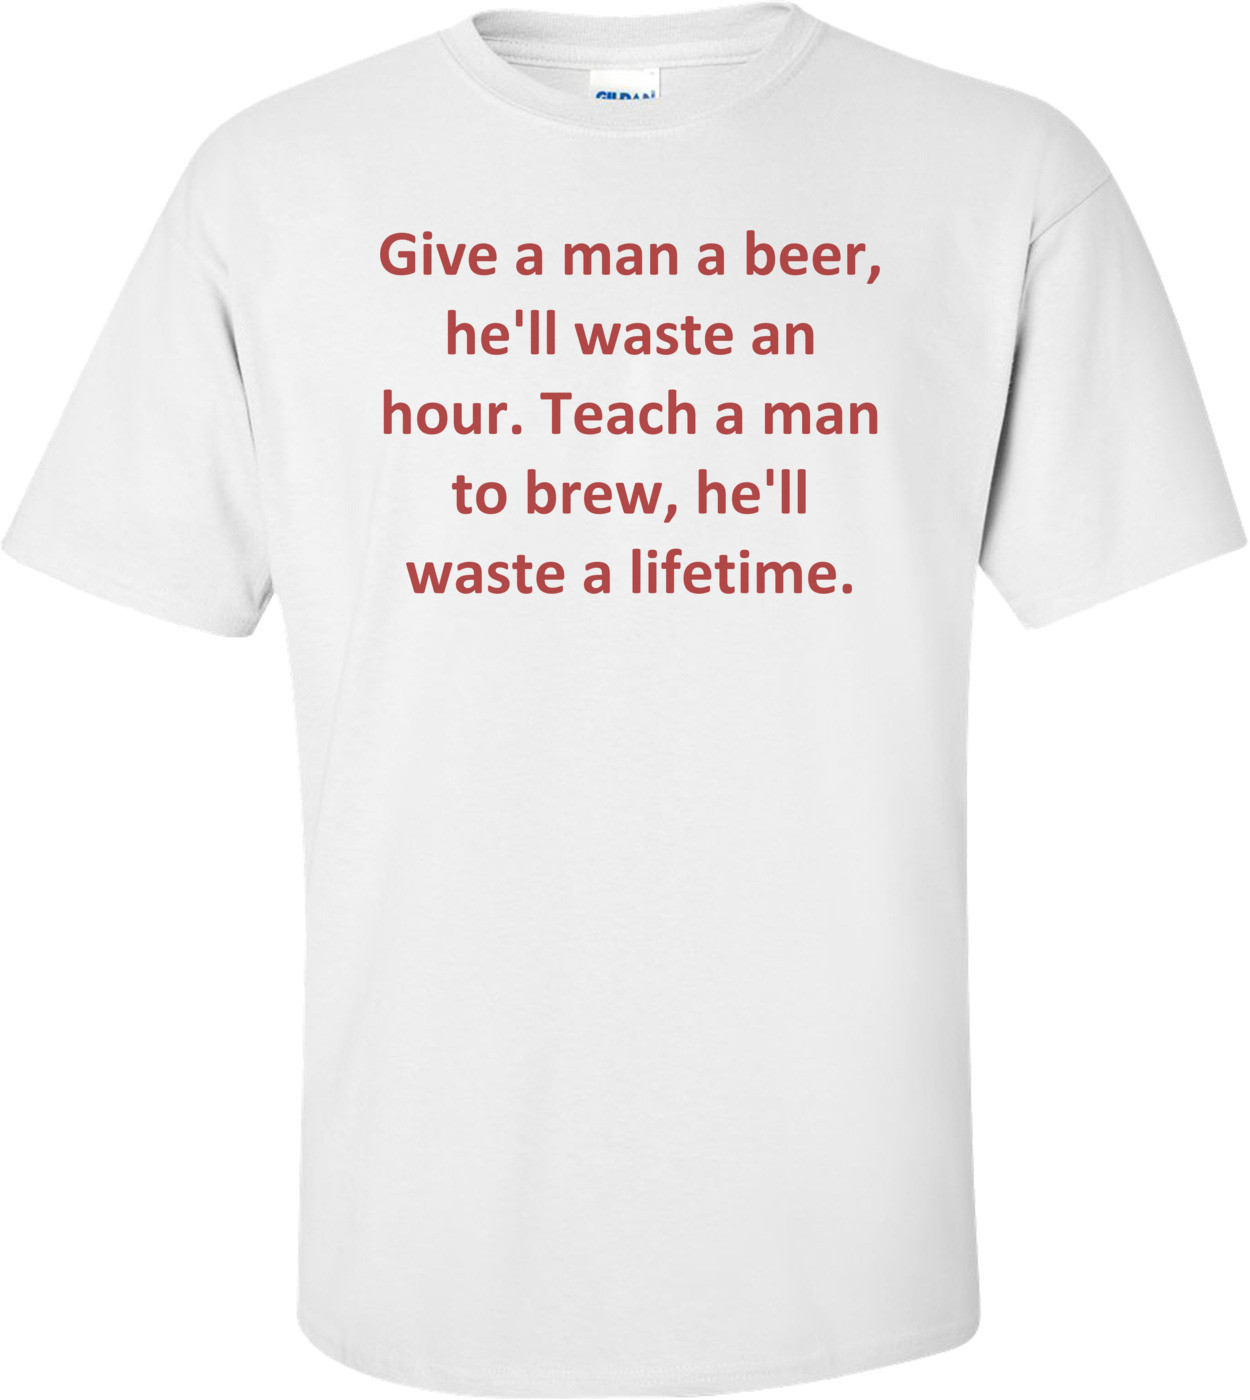 Give a man a beer, he'll waste an hour. Teach a man to brew, he'll waste a lifetime.